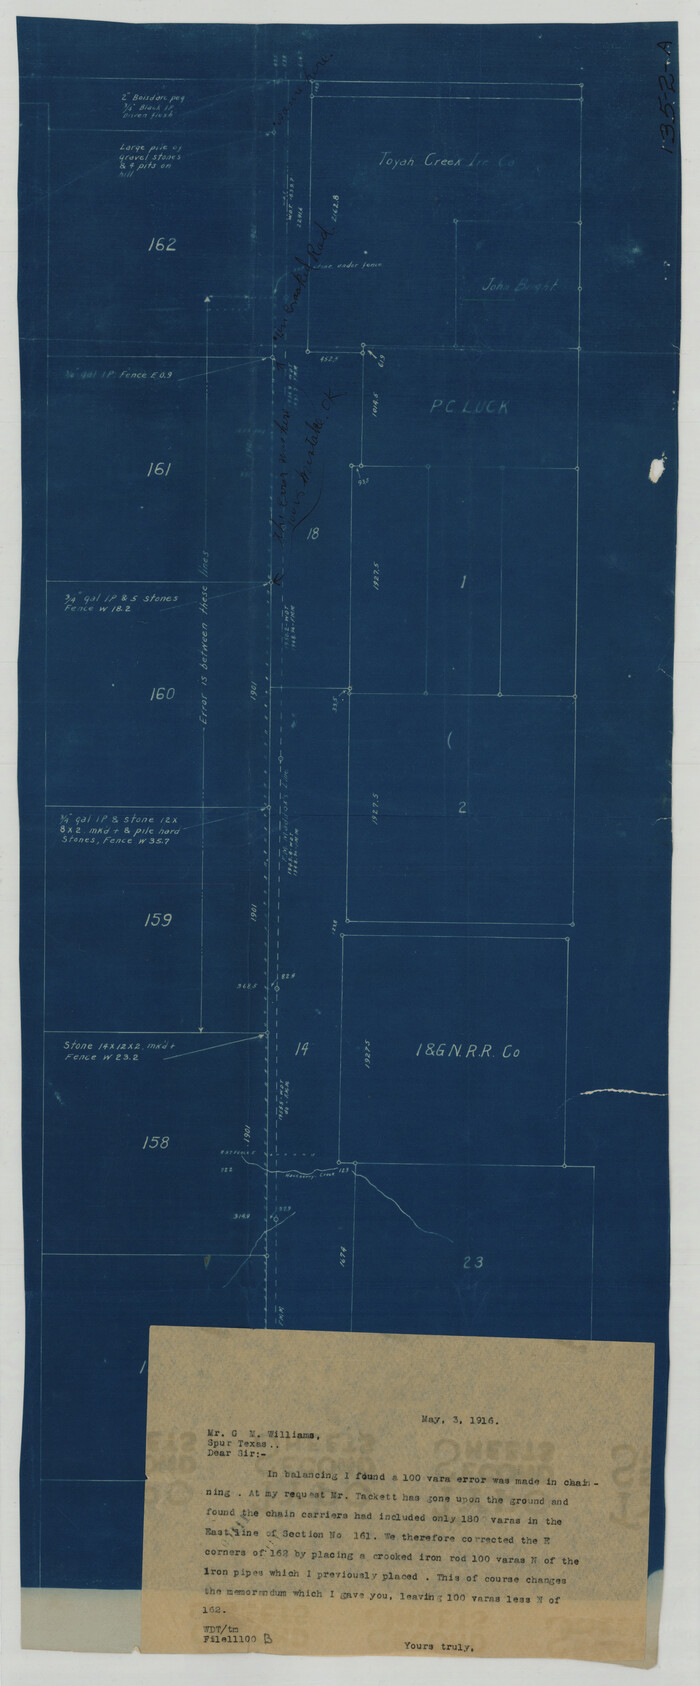 93003, [Sections 158-162 and surveys to the east], Twichell Survey Records